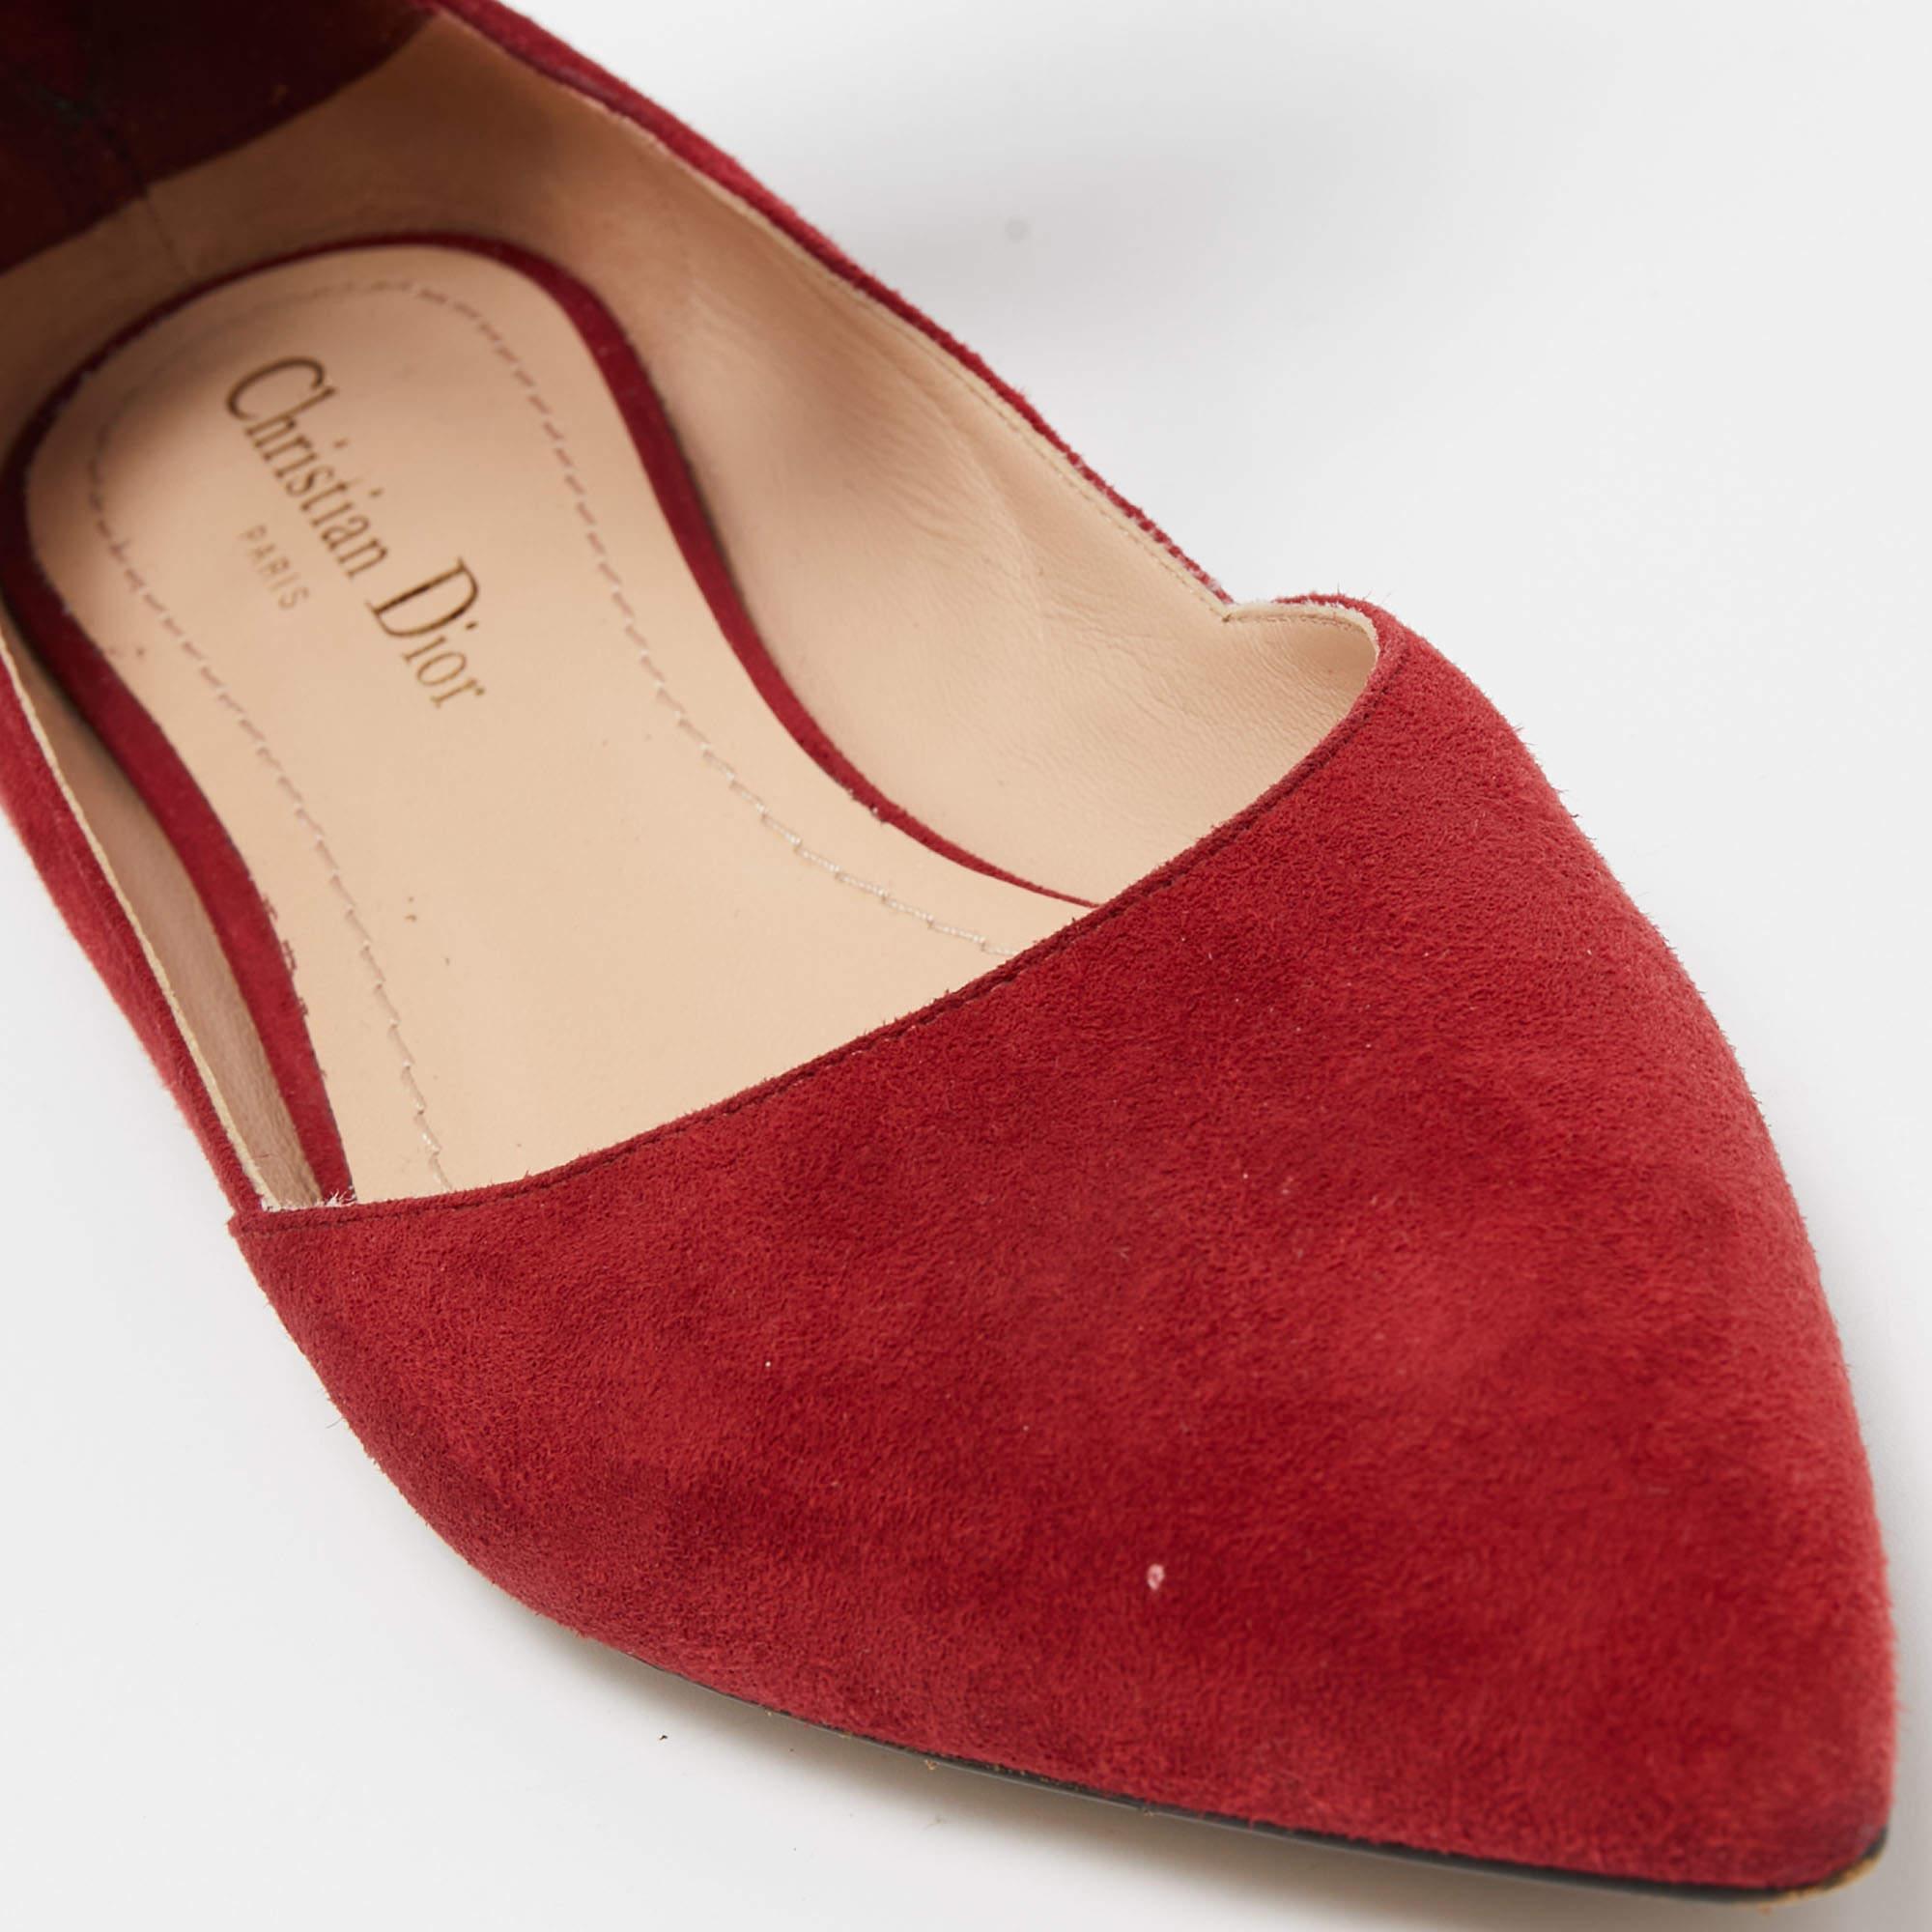 Dior Red Suede Ankle Wrap Ballet Flats Size 38 4